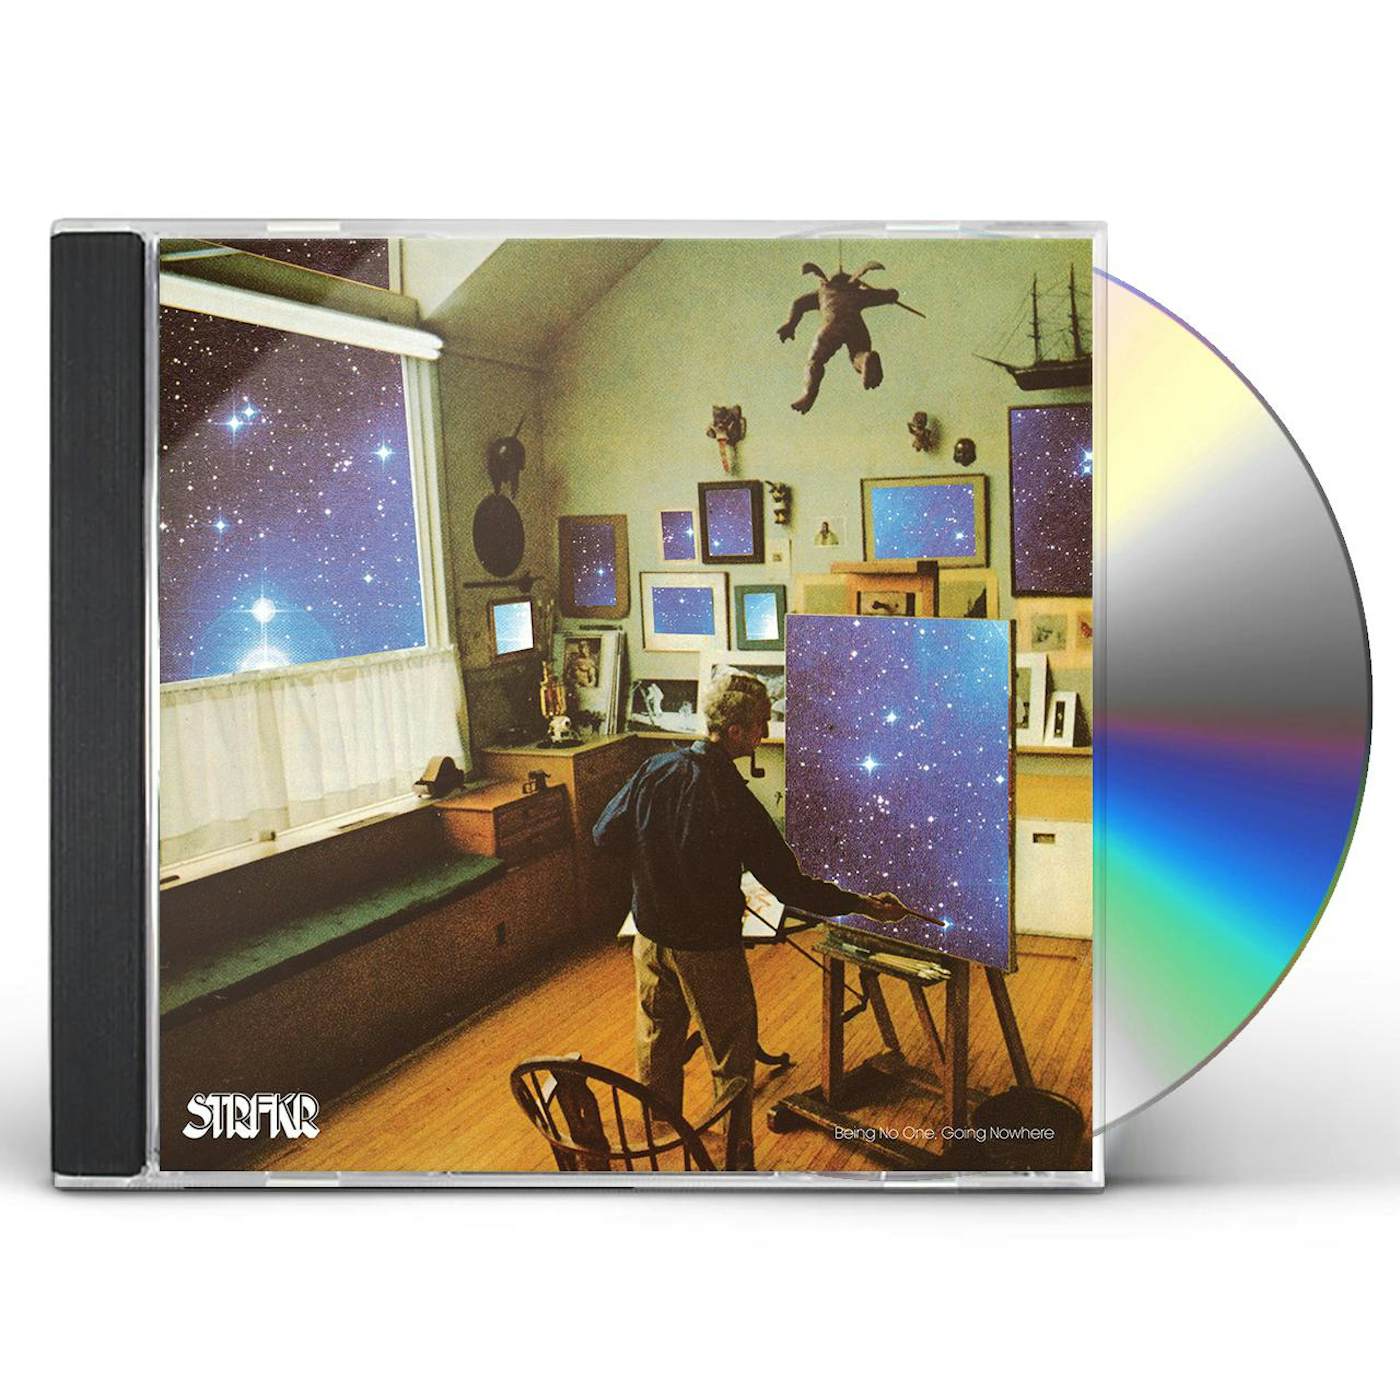 STRFKR BEING NO ONE GOING NOWHERE CD